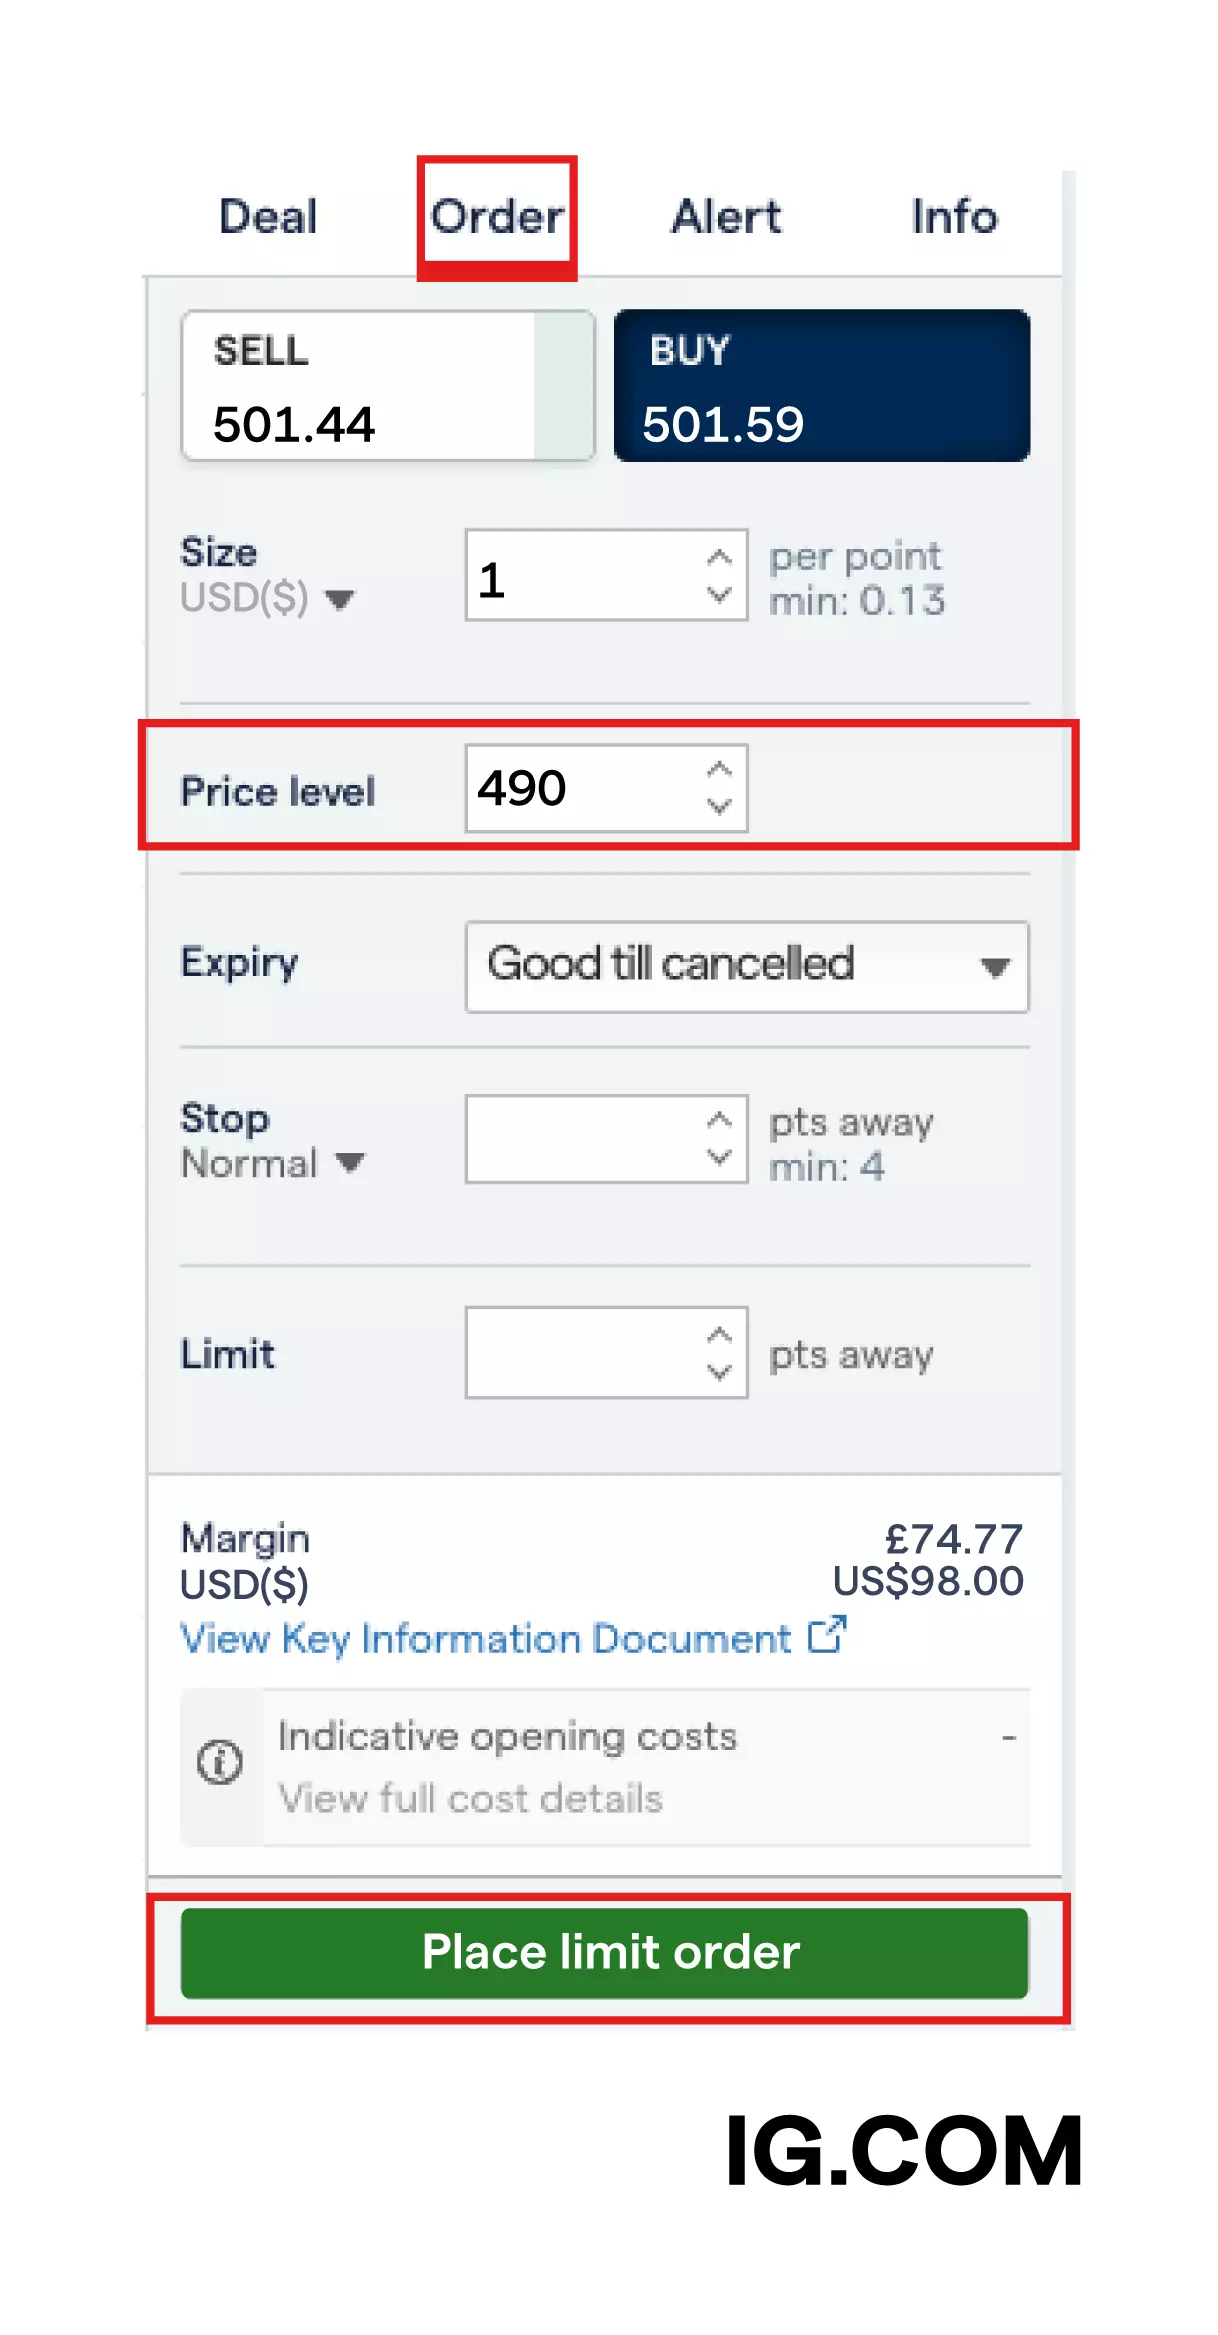 A deal ticket with an order to open a trade when the market hits a specified price level.